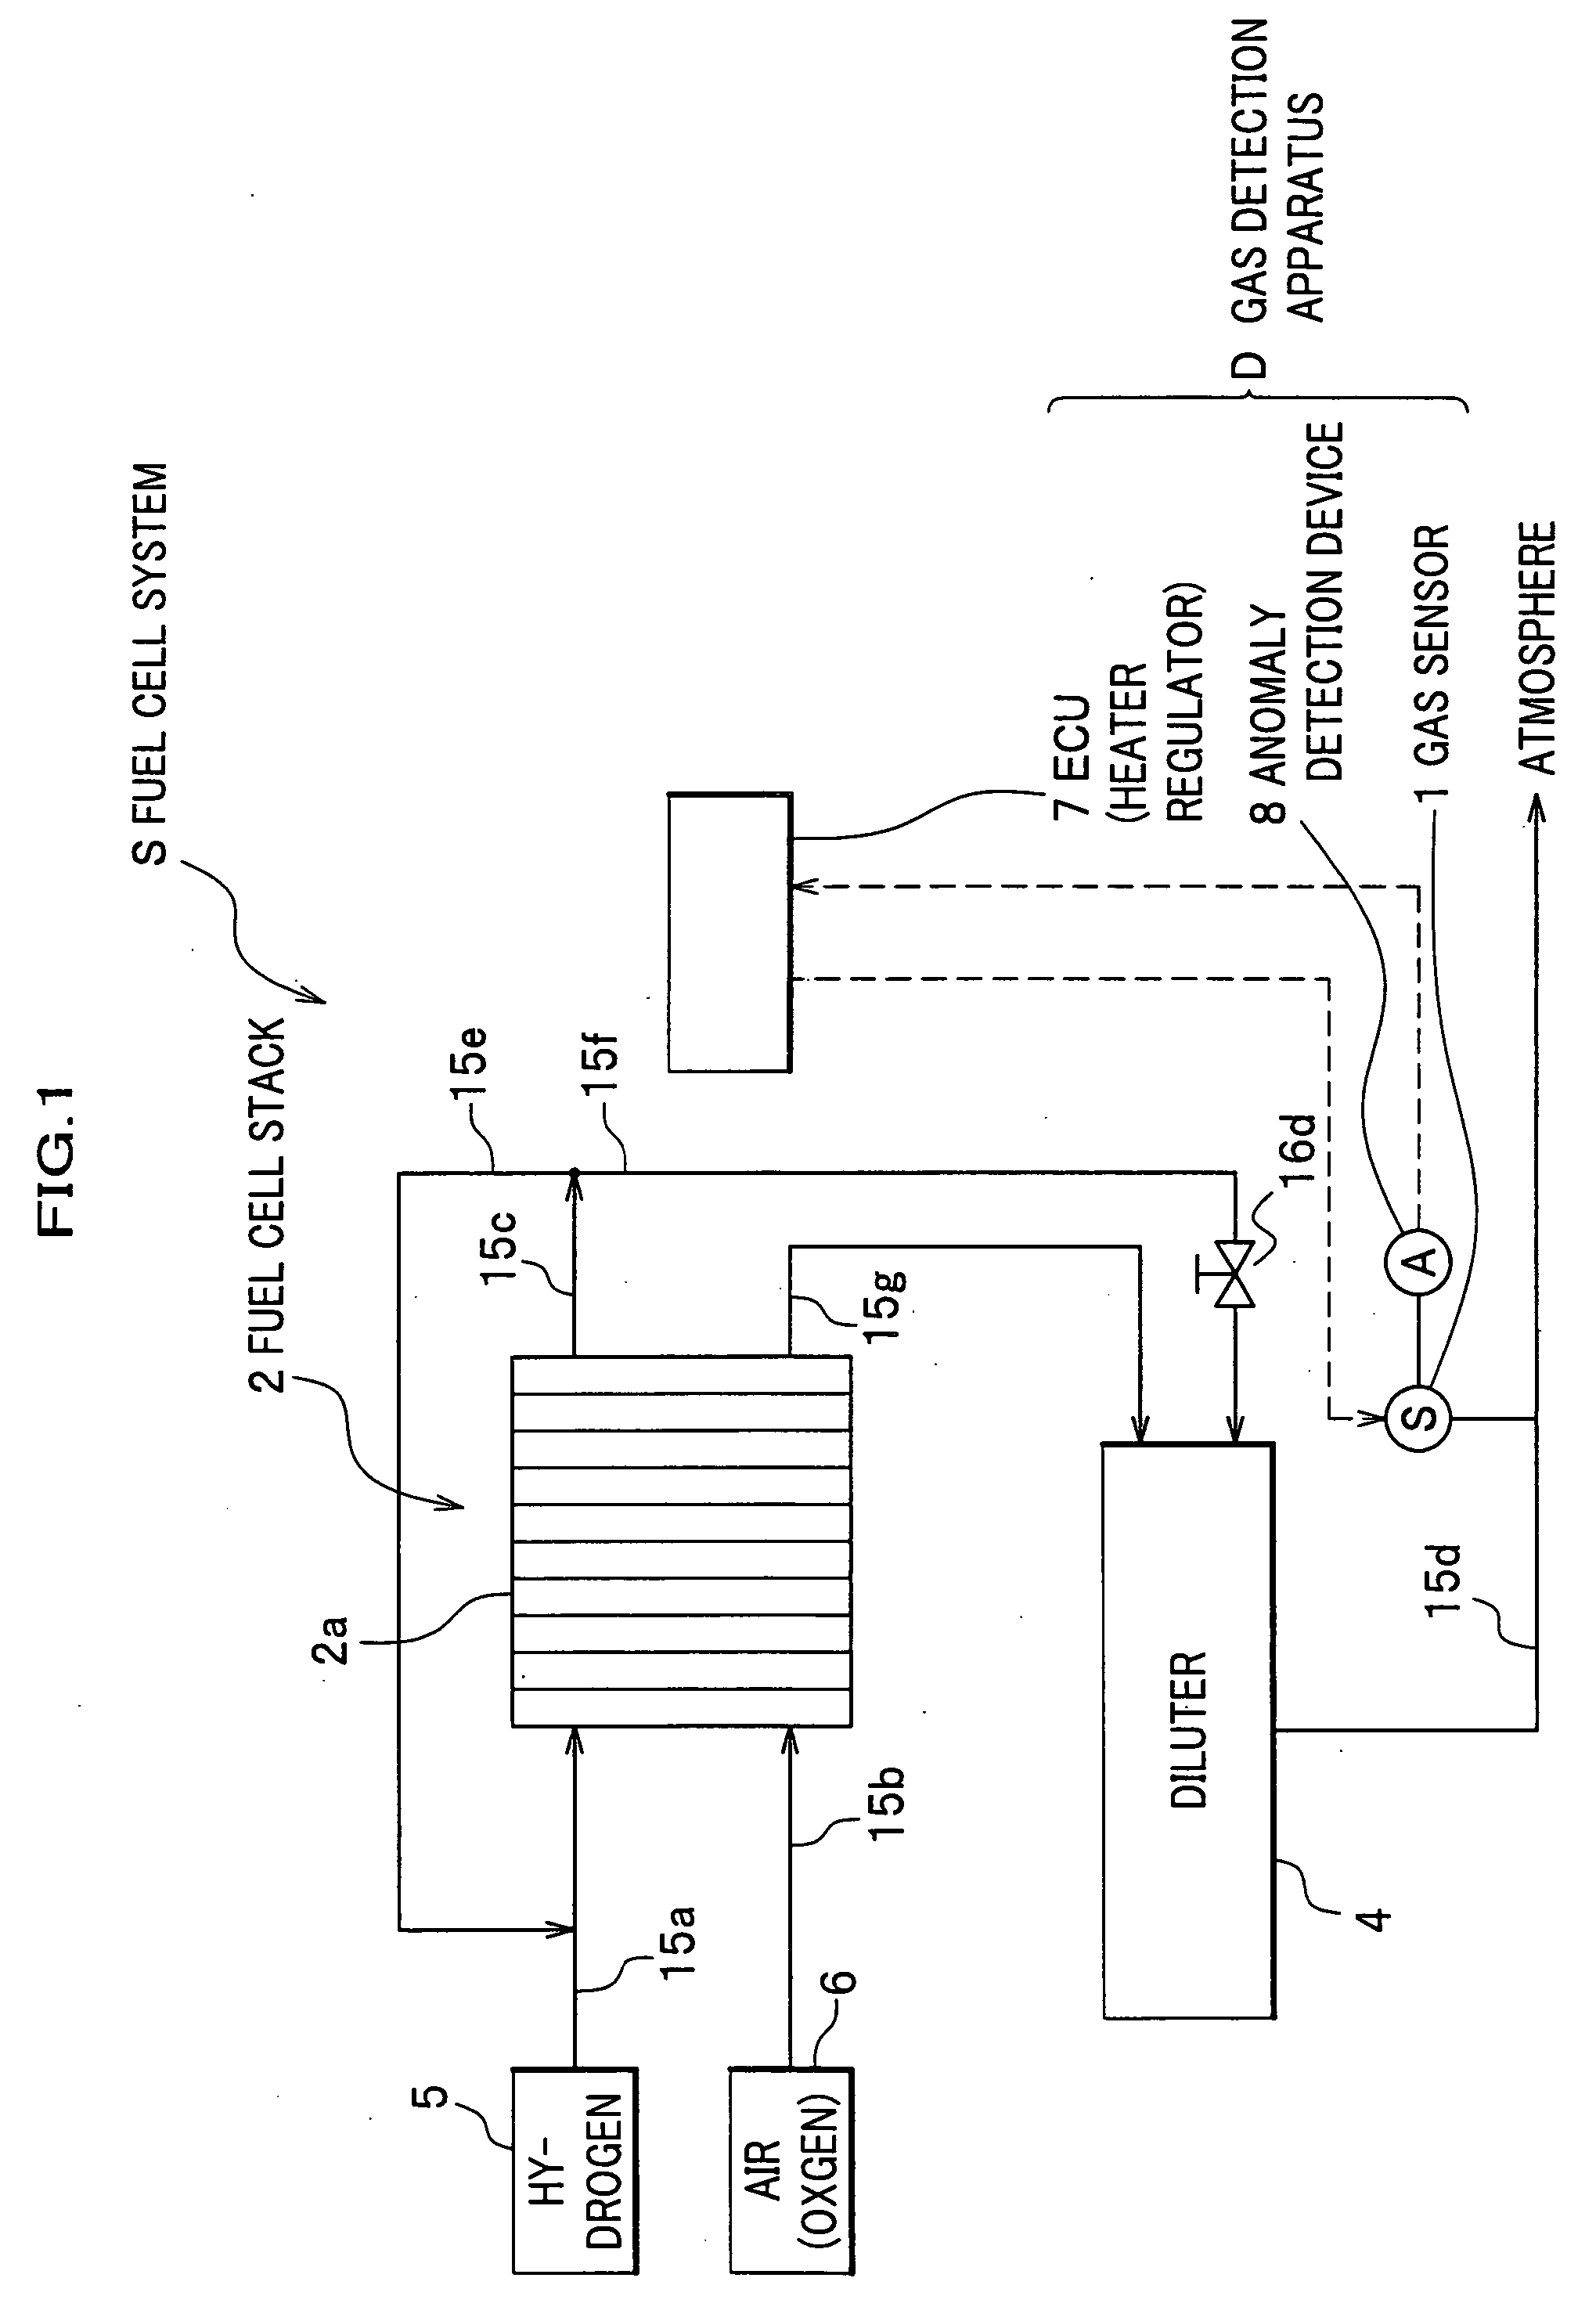 Gas detection apparatus and method